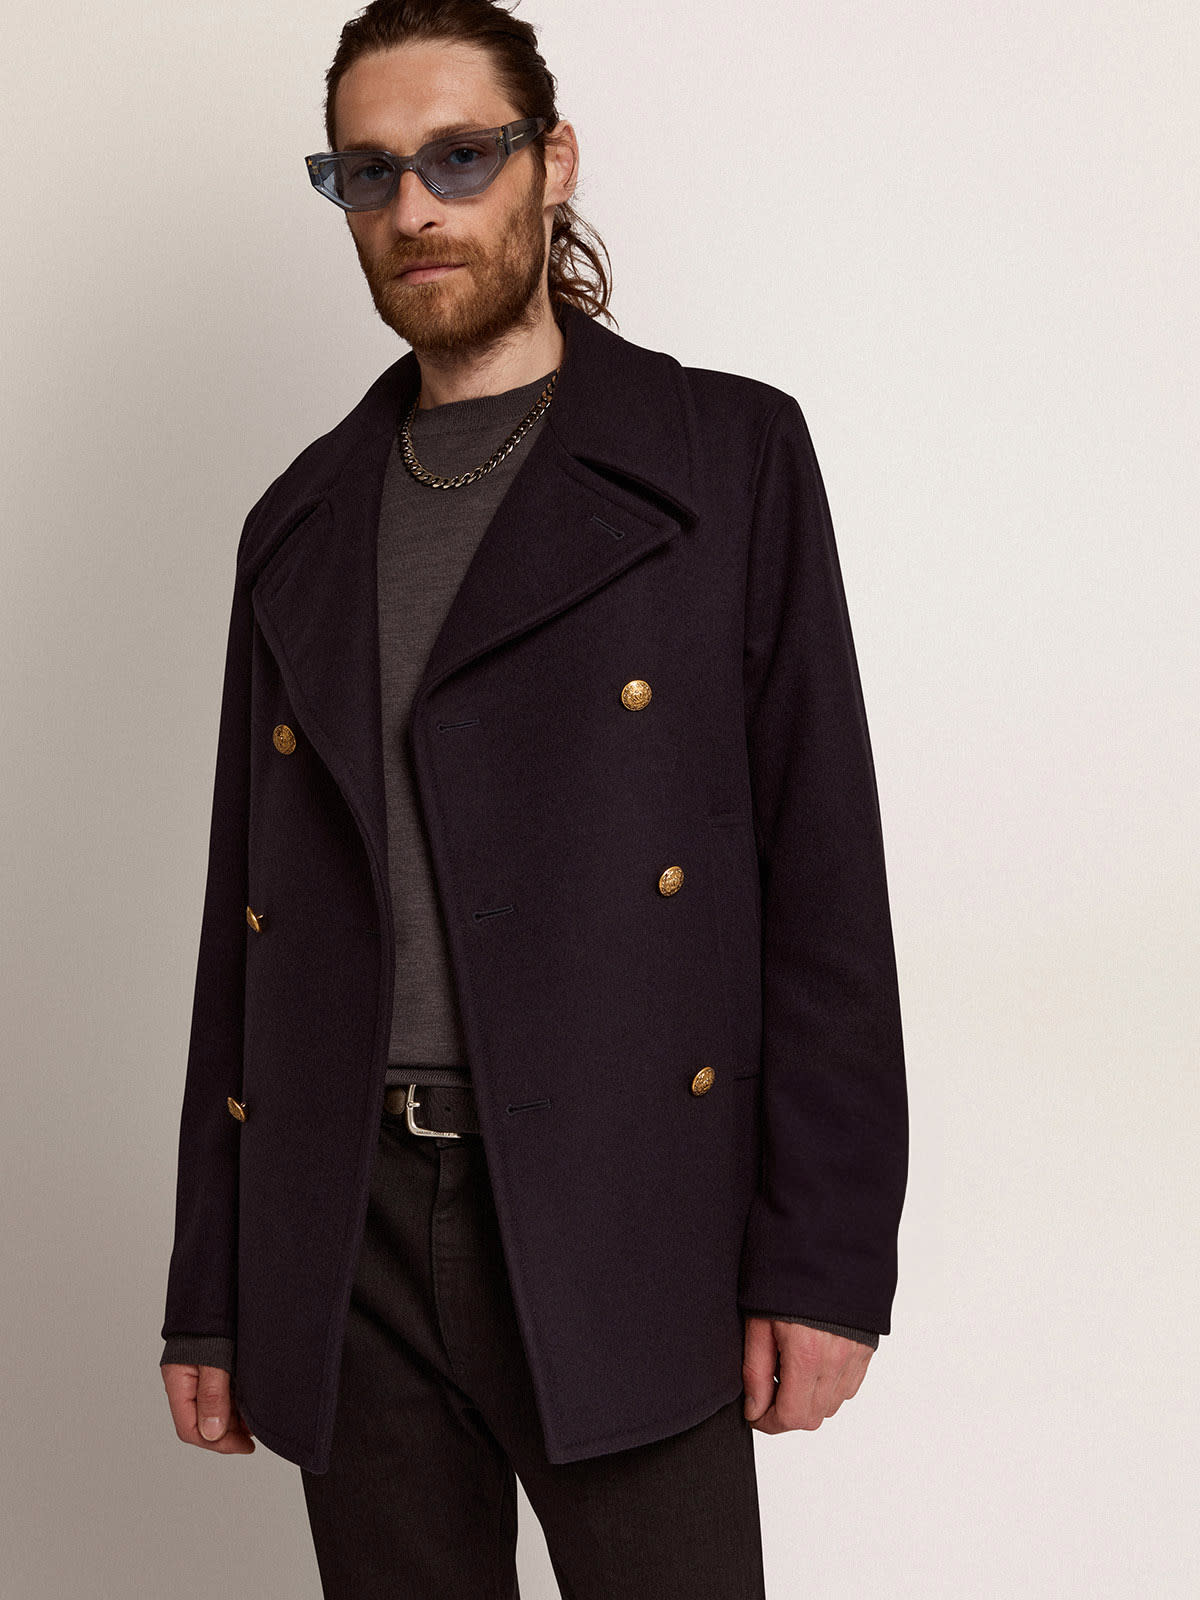 Men's double-breasted coat in dark blue wool with gold buttons